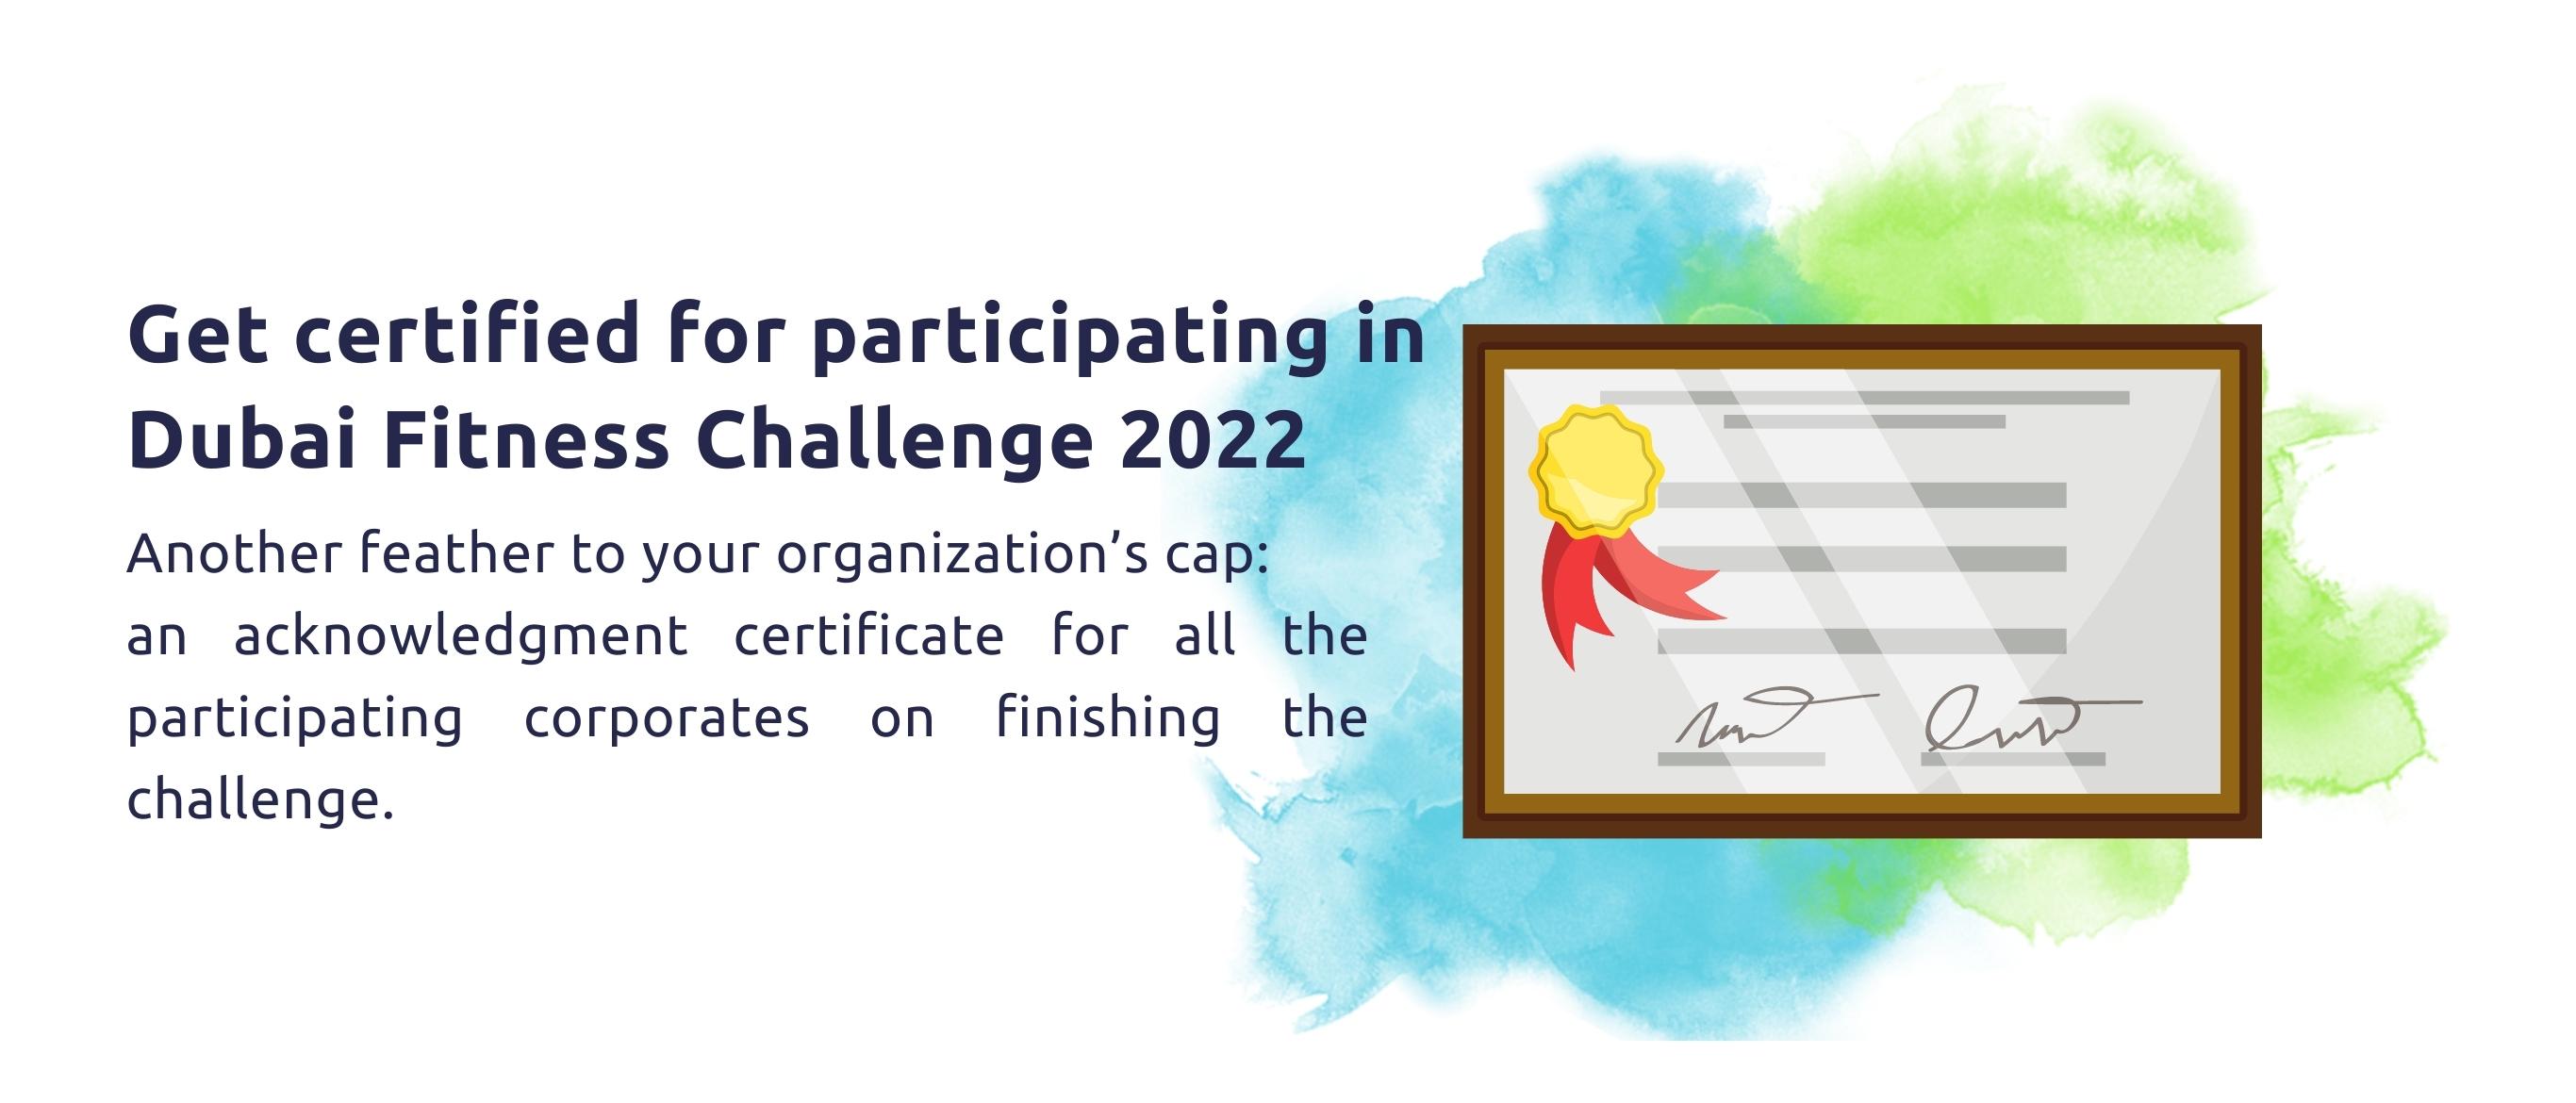 Get certified for participating in Dubai Fitness Challenge 2022.  Another feather to your organization’s cap: an acknowledgment certificate for all the participating corporates on finishing the challenge.